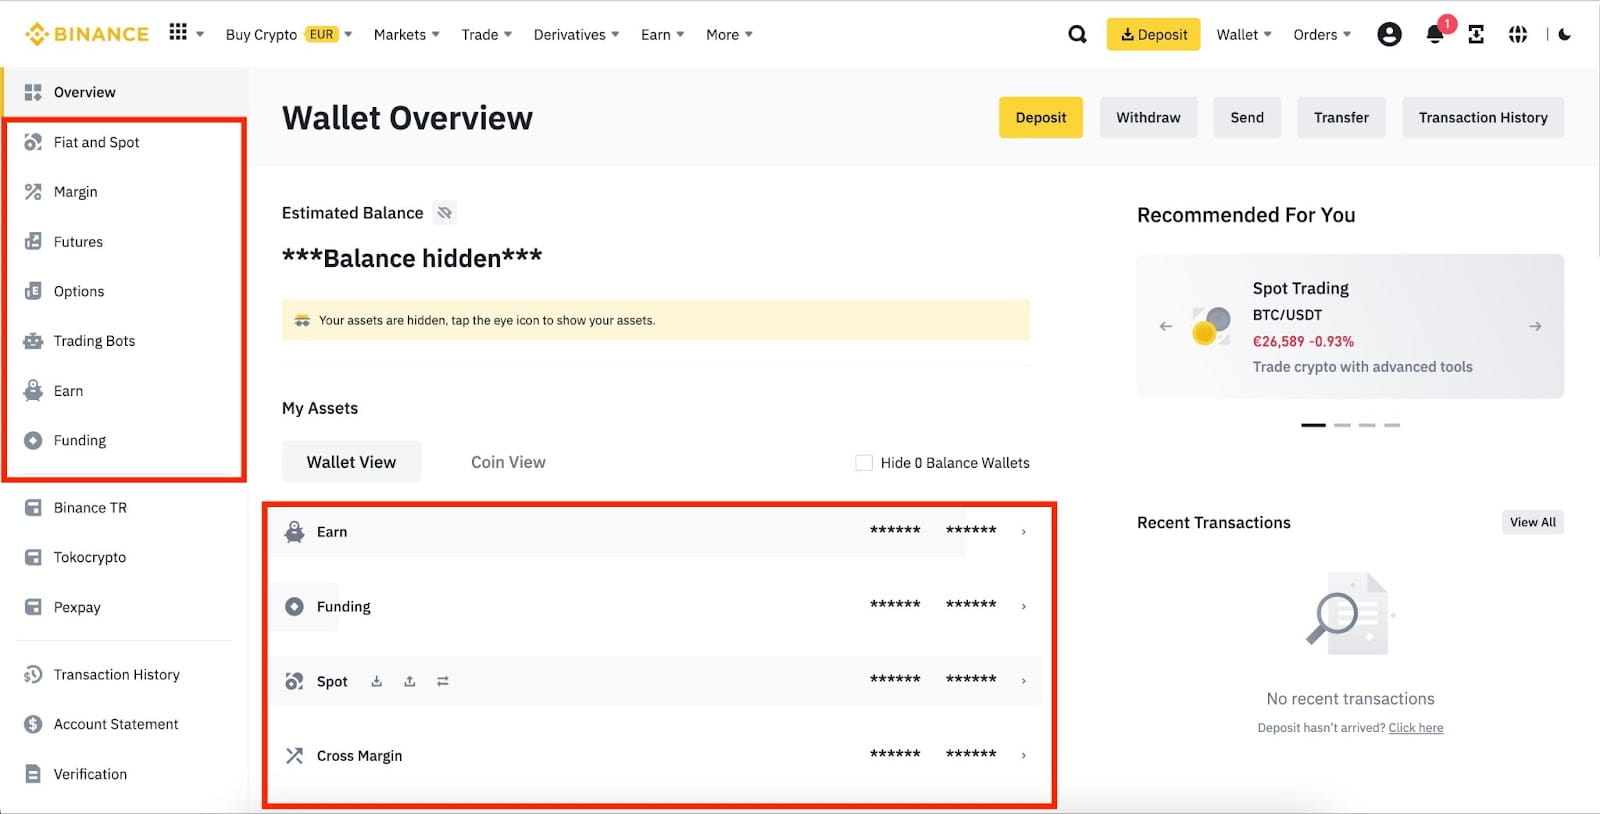 How To Find P2P Wallet On Binance